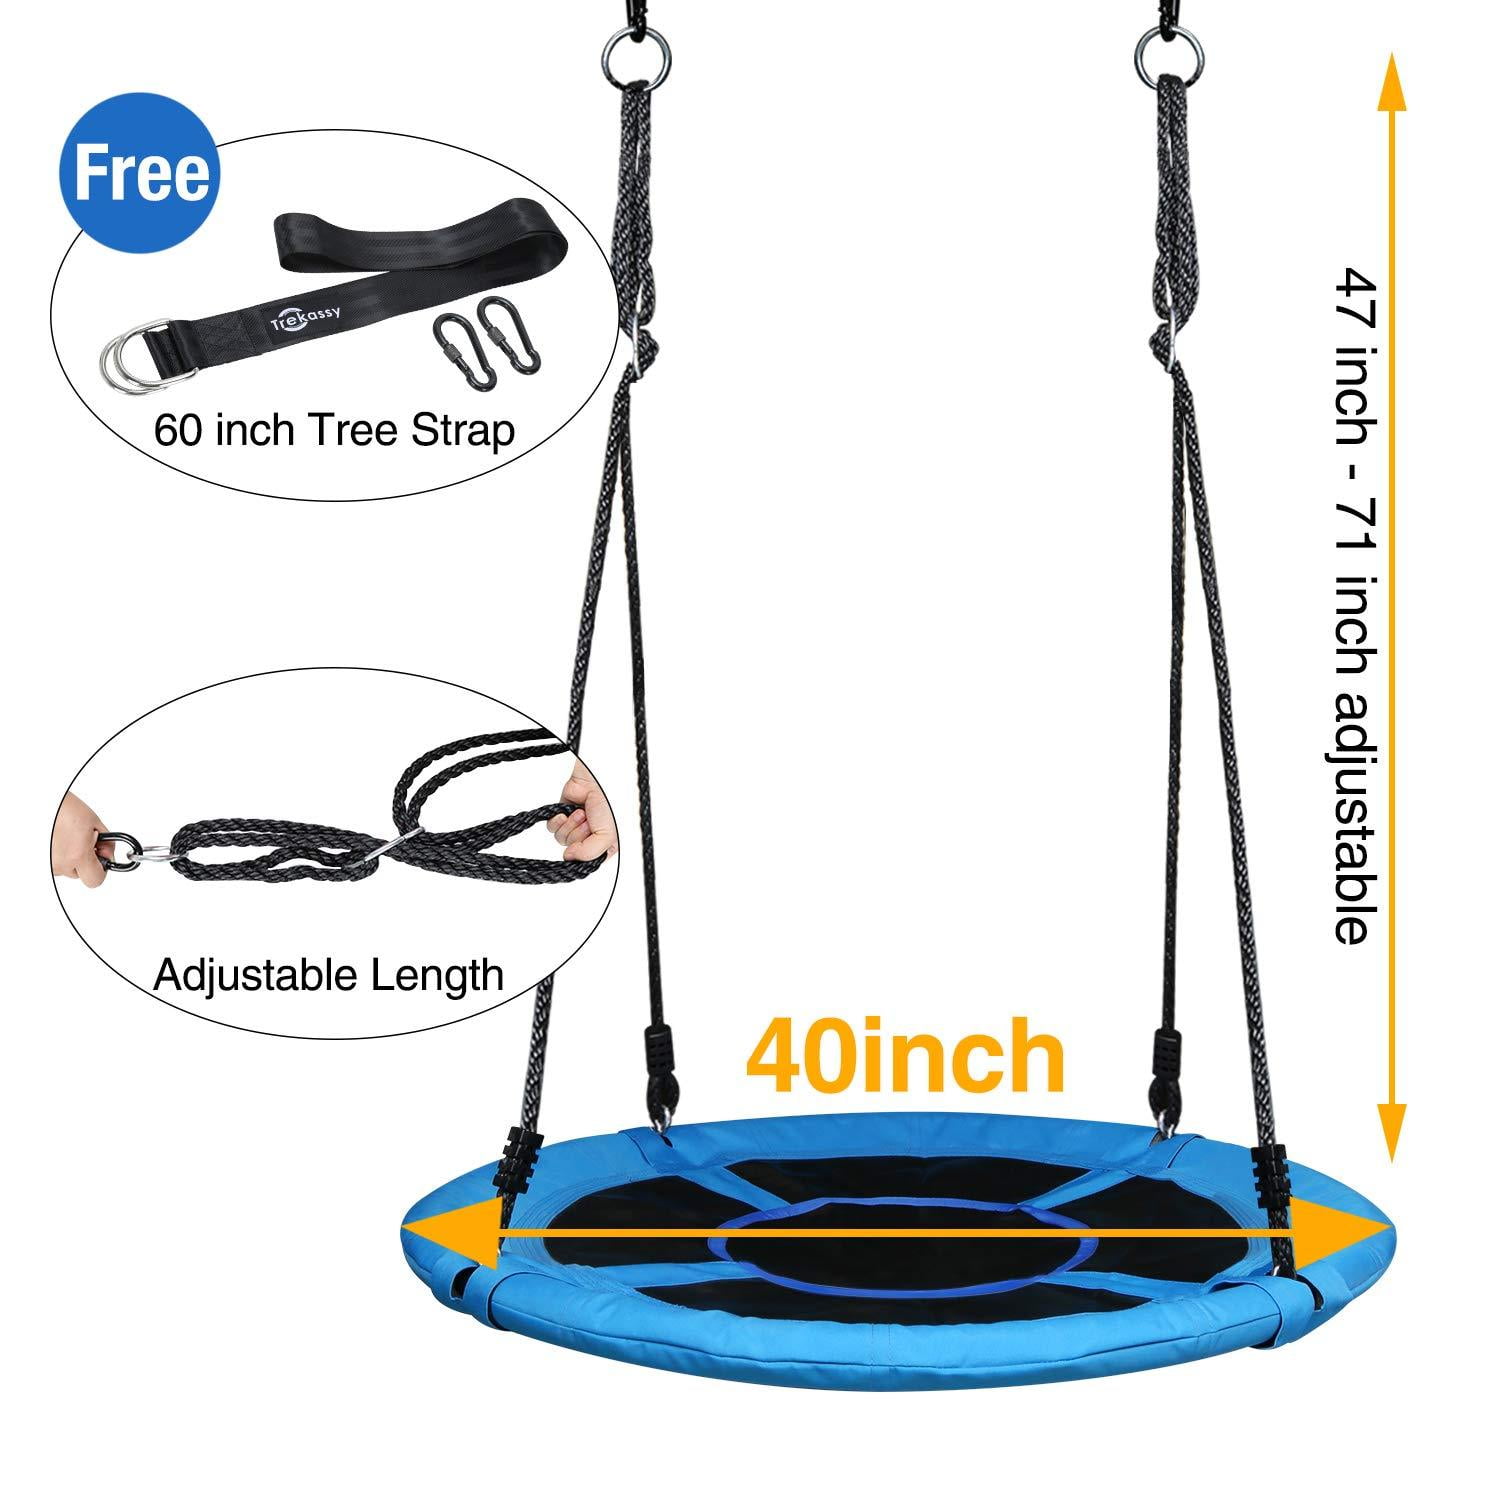 Trekassy 1000lbs 40 Saucer Tree Swing for Kids Adults with Heavy Duty Chains Plastic Coated Textilene Wear-Resistant and 2pcs 10ft Tree Hanging Straps 